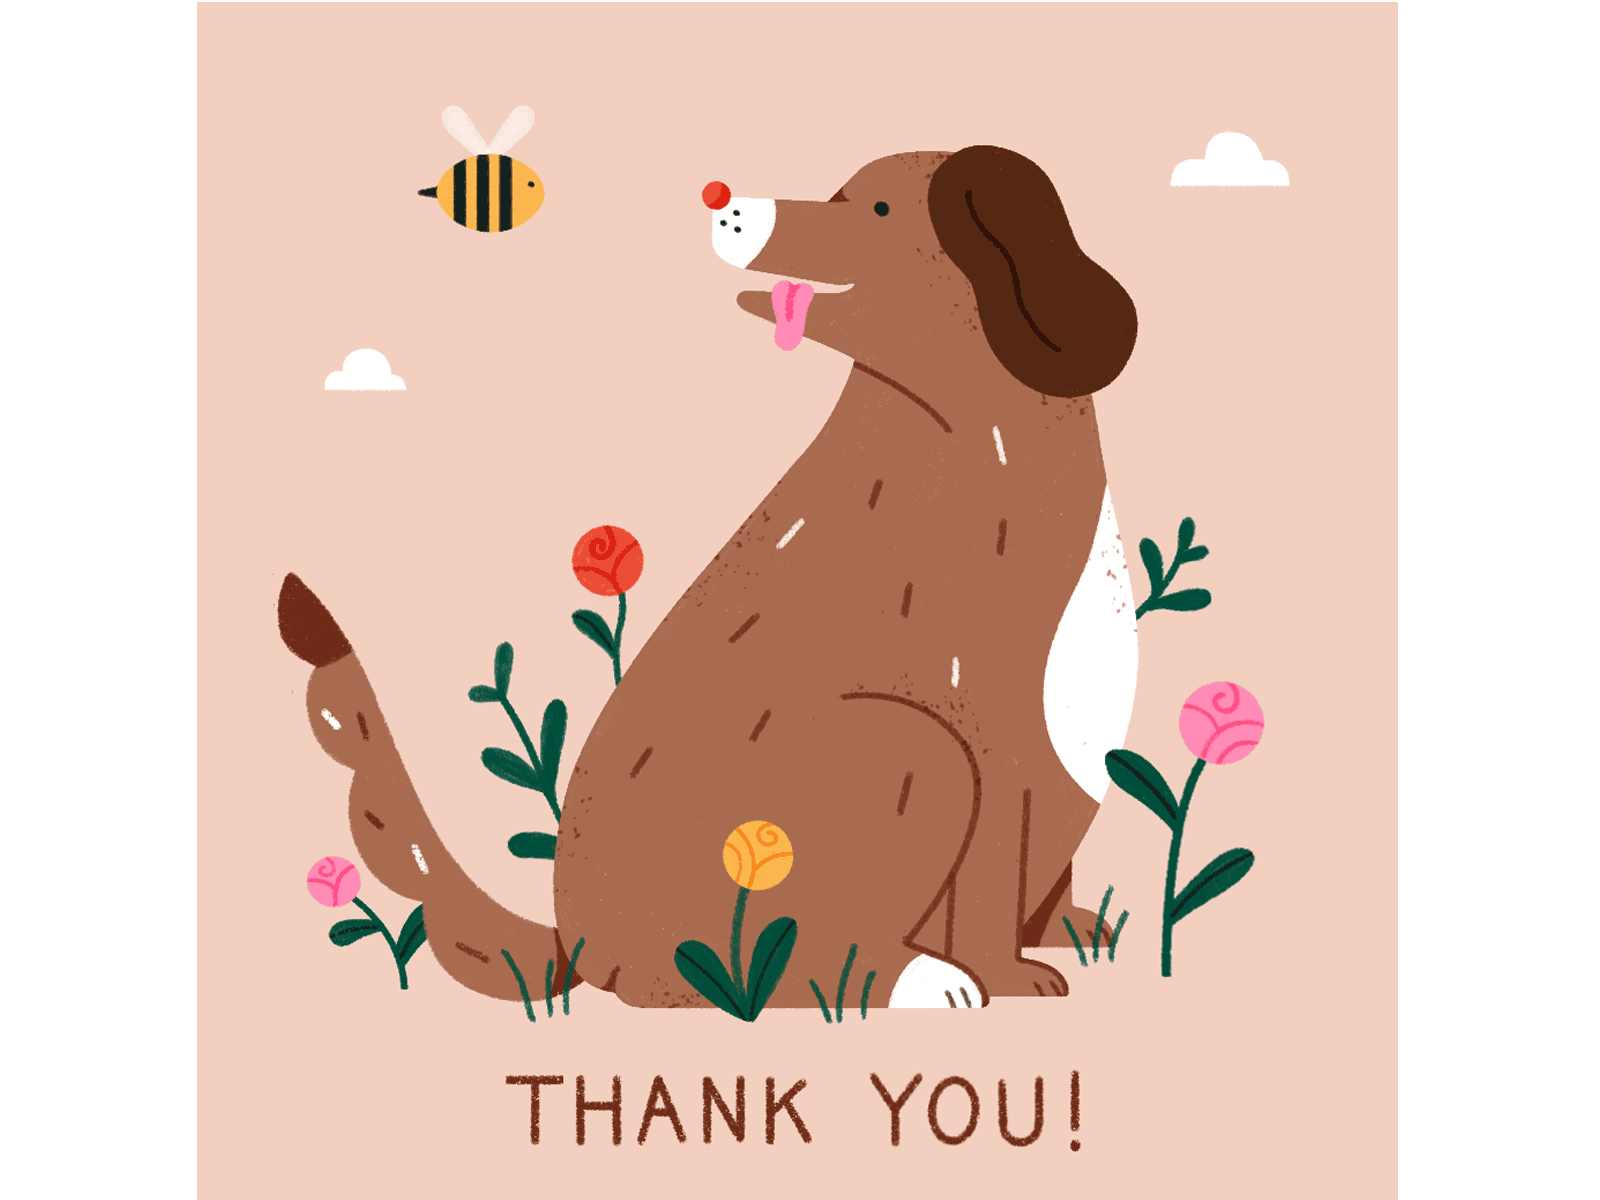 thank-you-gift-card-for-giftee-by-alana-keenan-on-dribbble